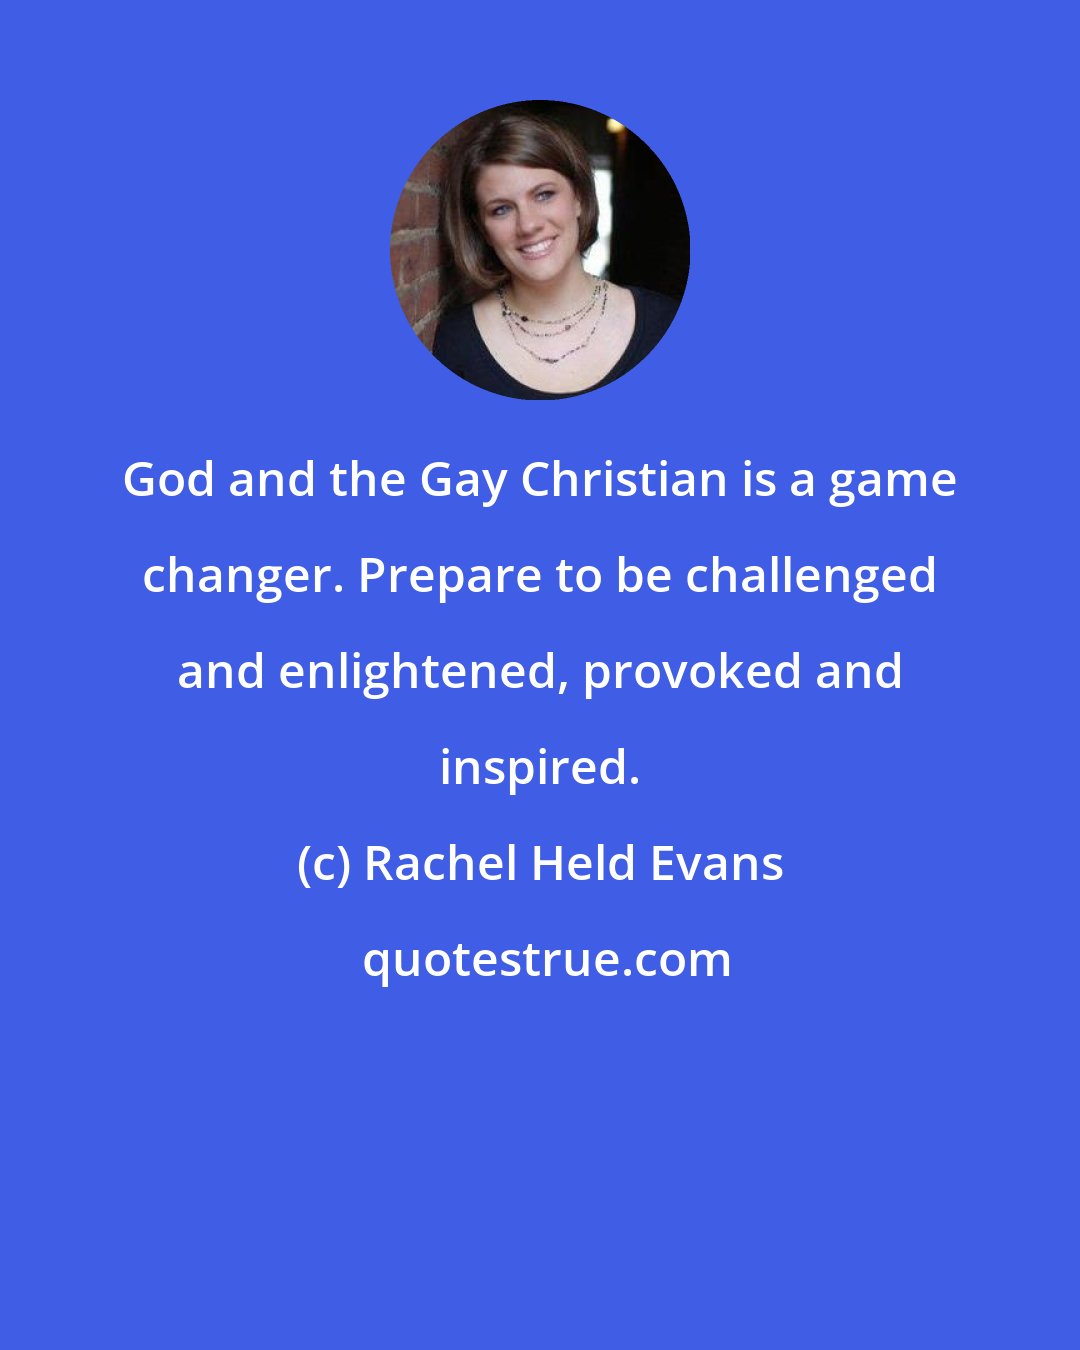 Rachel Held Evans: God and the Gay Christian is a game changer. Prepare to be challenged and enlightened, provoked and inspired.